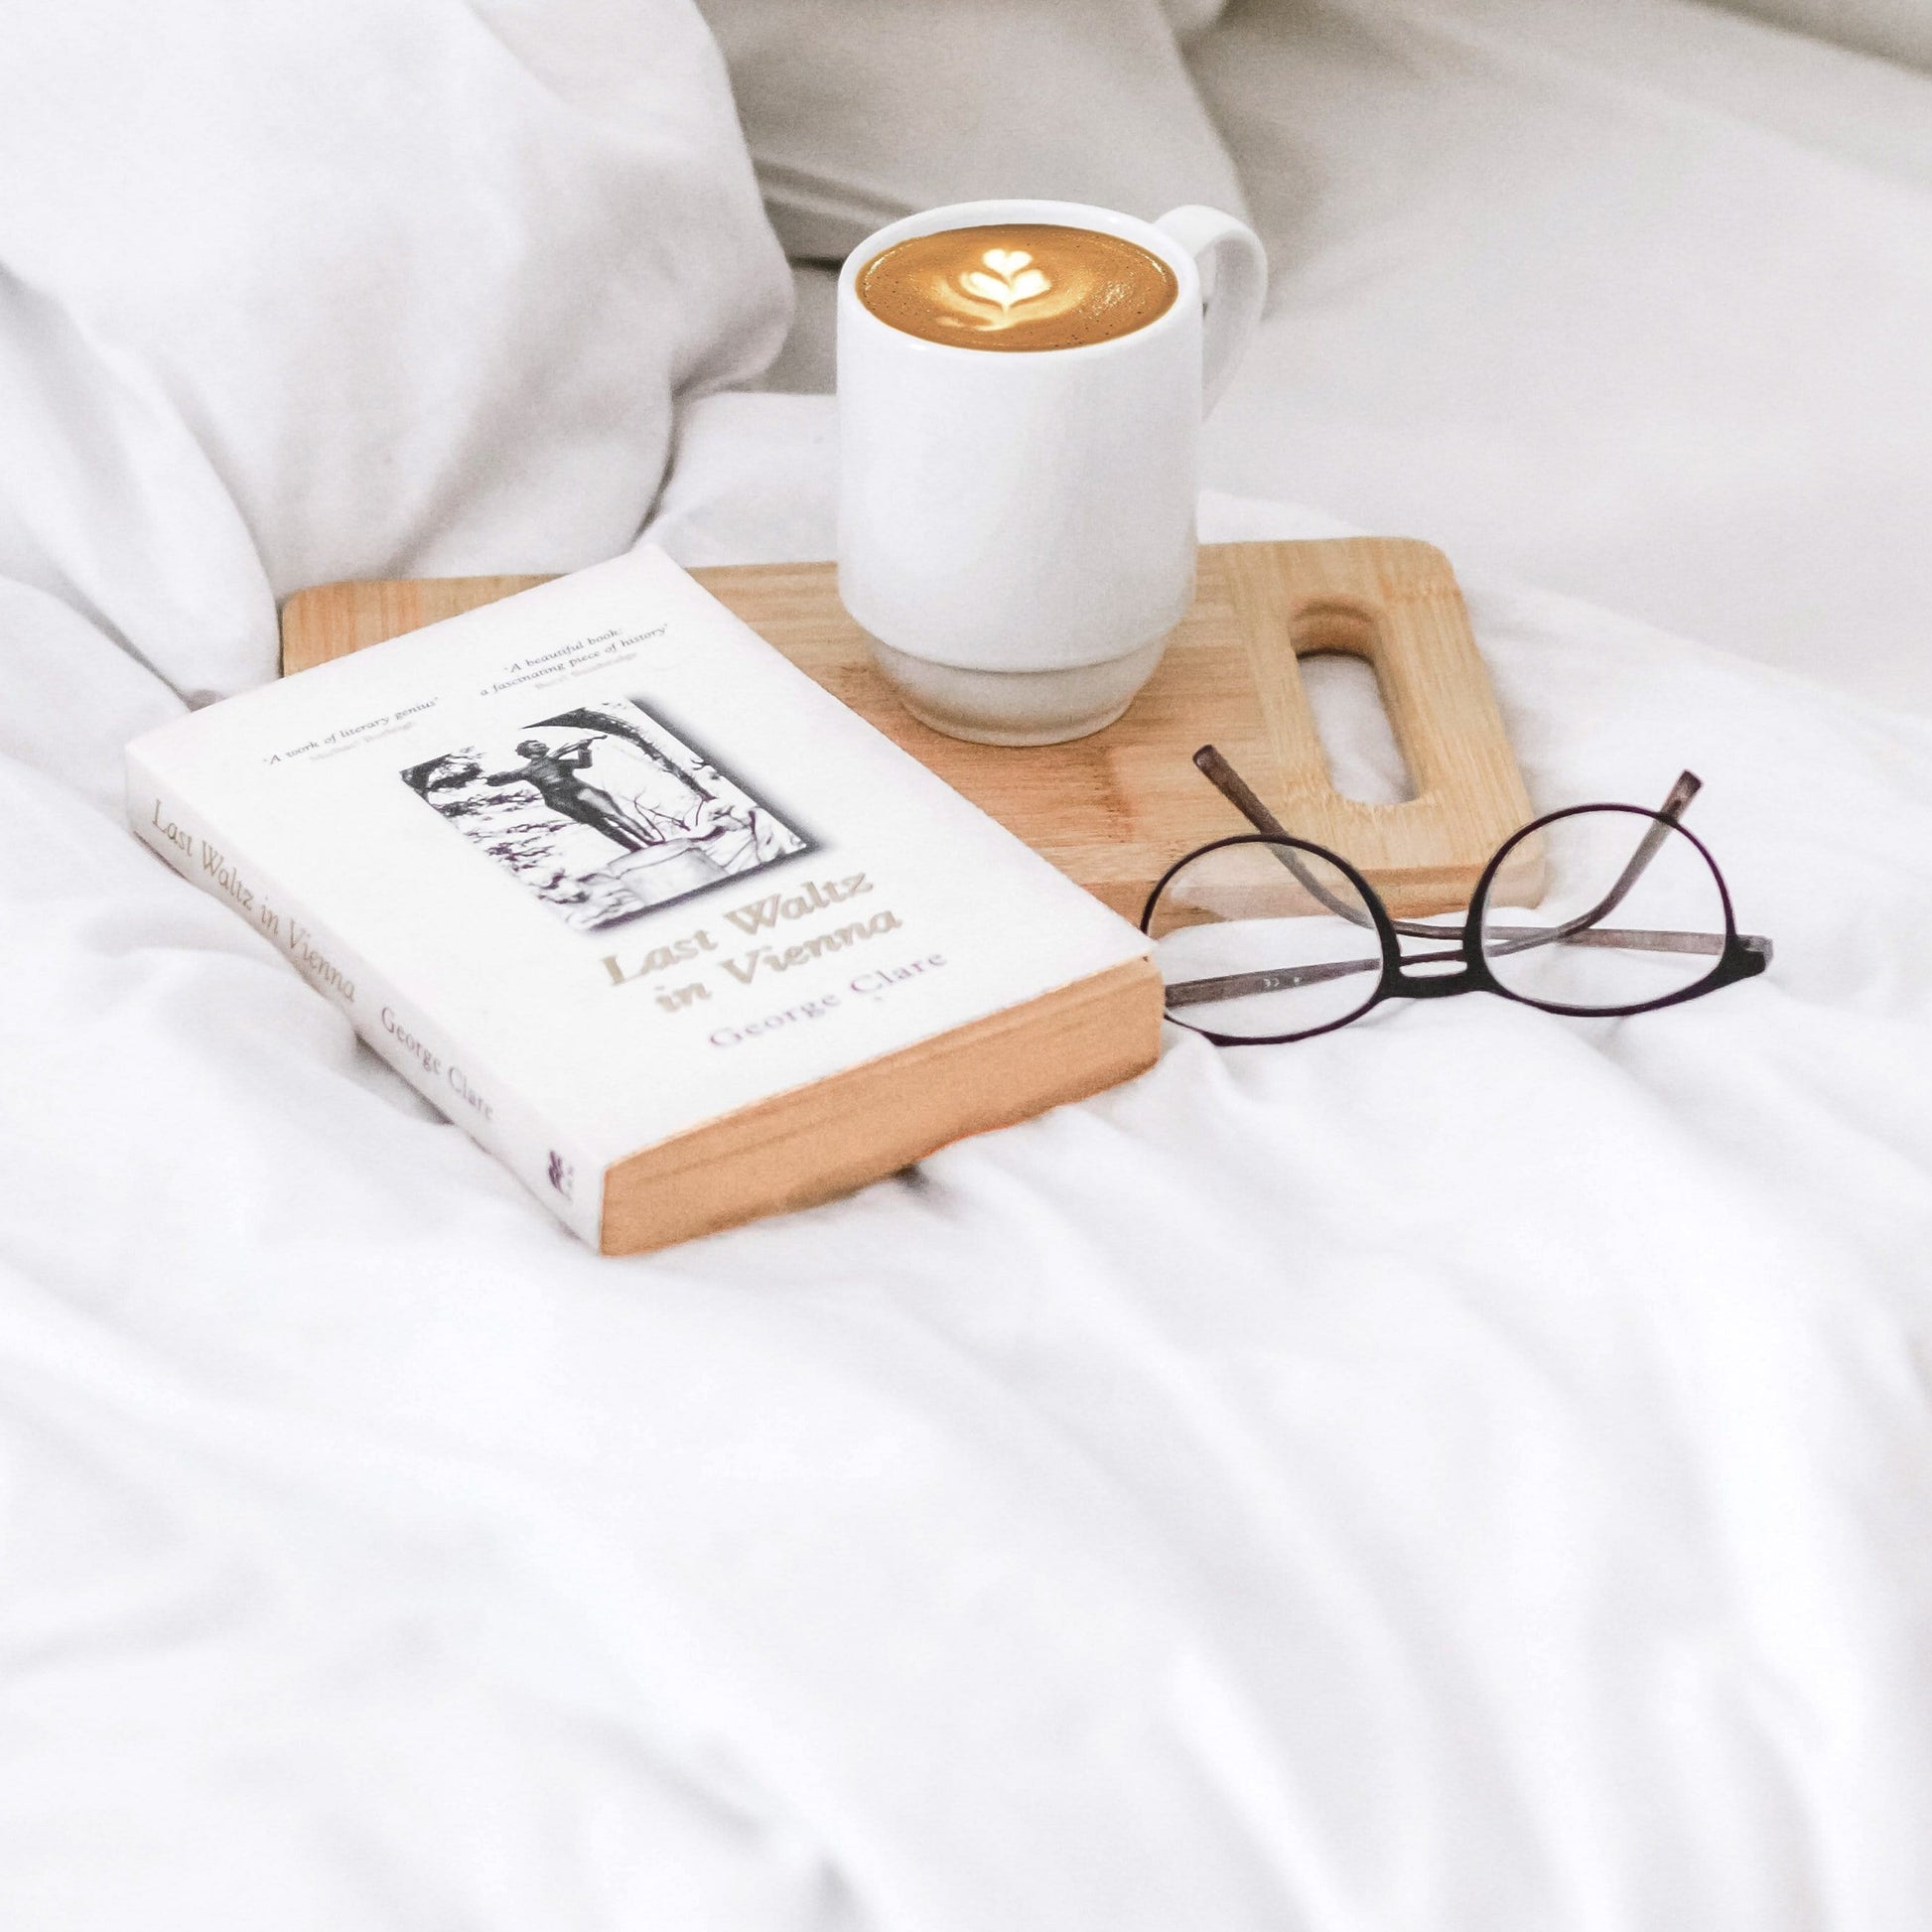 picture of our white beddings duvet cover with a book, reading glasses and a precariously place full cup of coffee on a board which has the potential to ruin the lovely white bedding cotton.